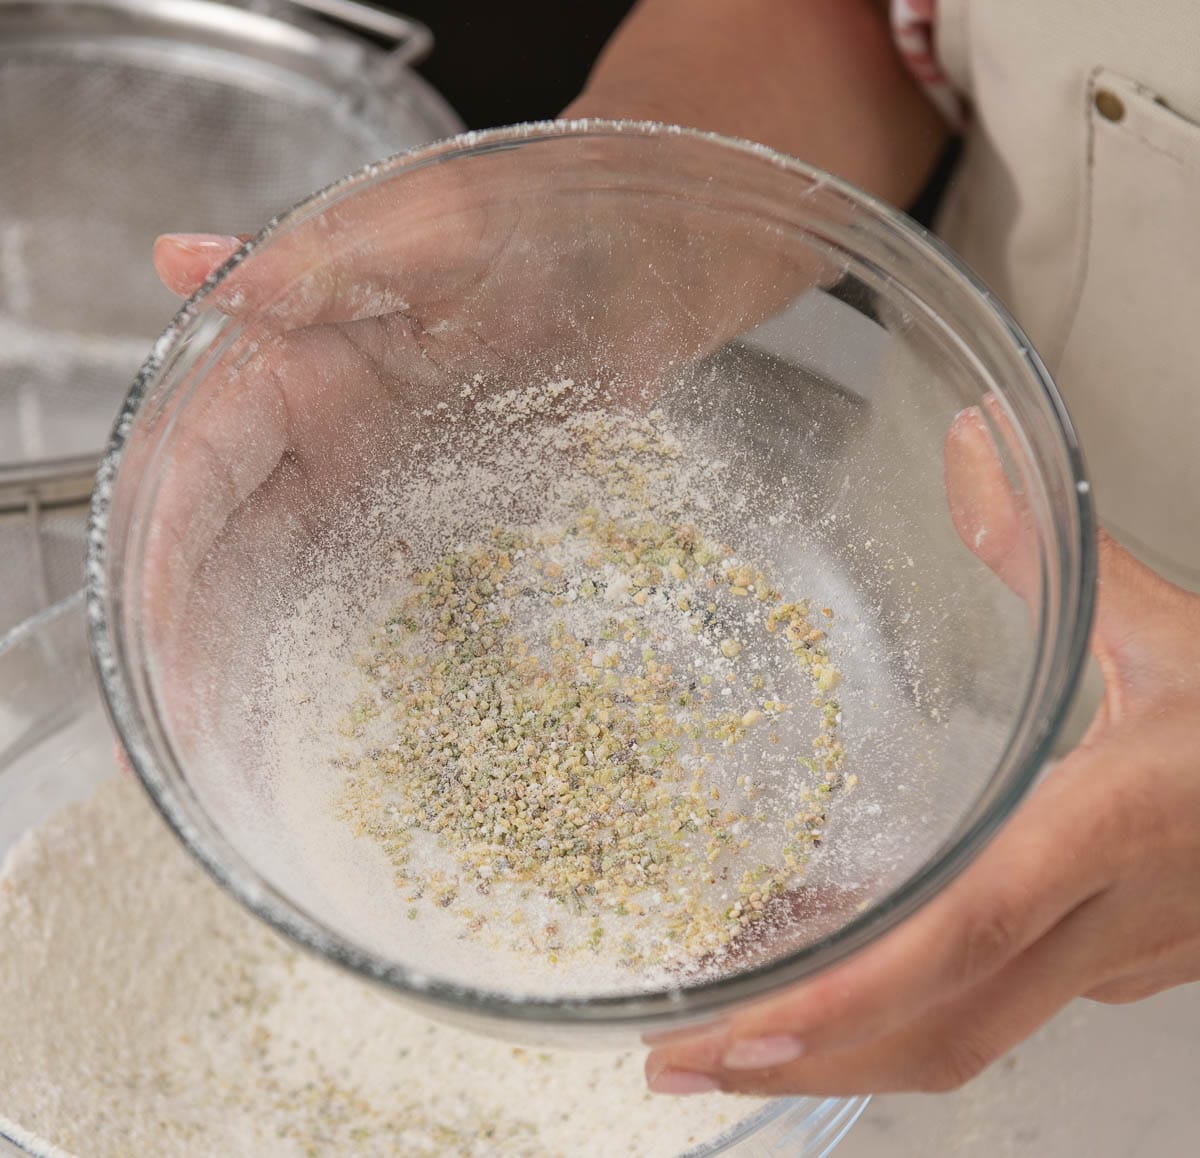 large pieces of pistachio in a sifter